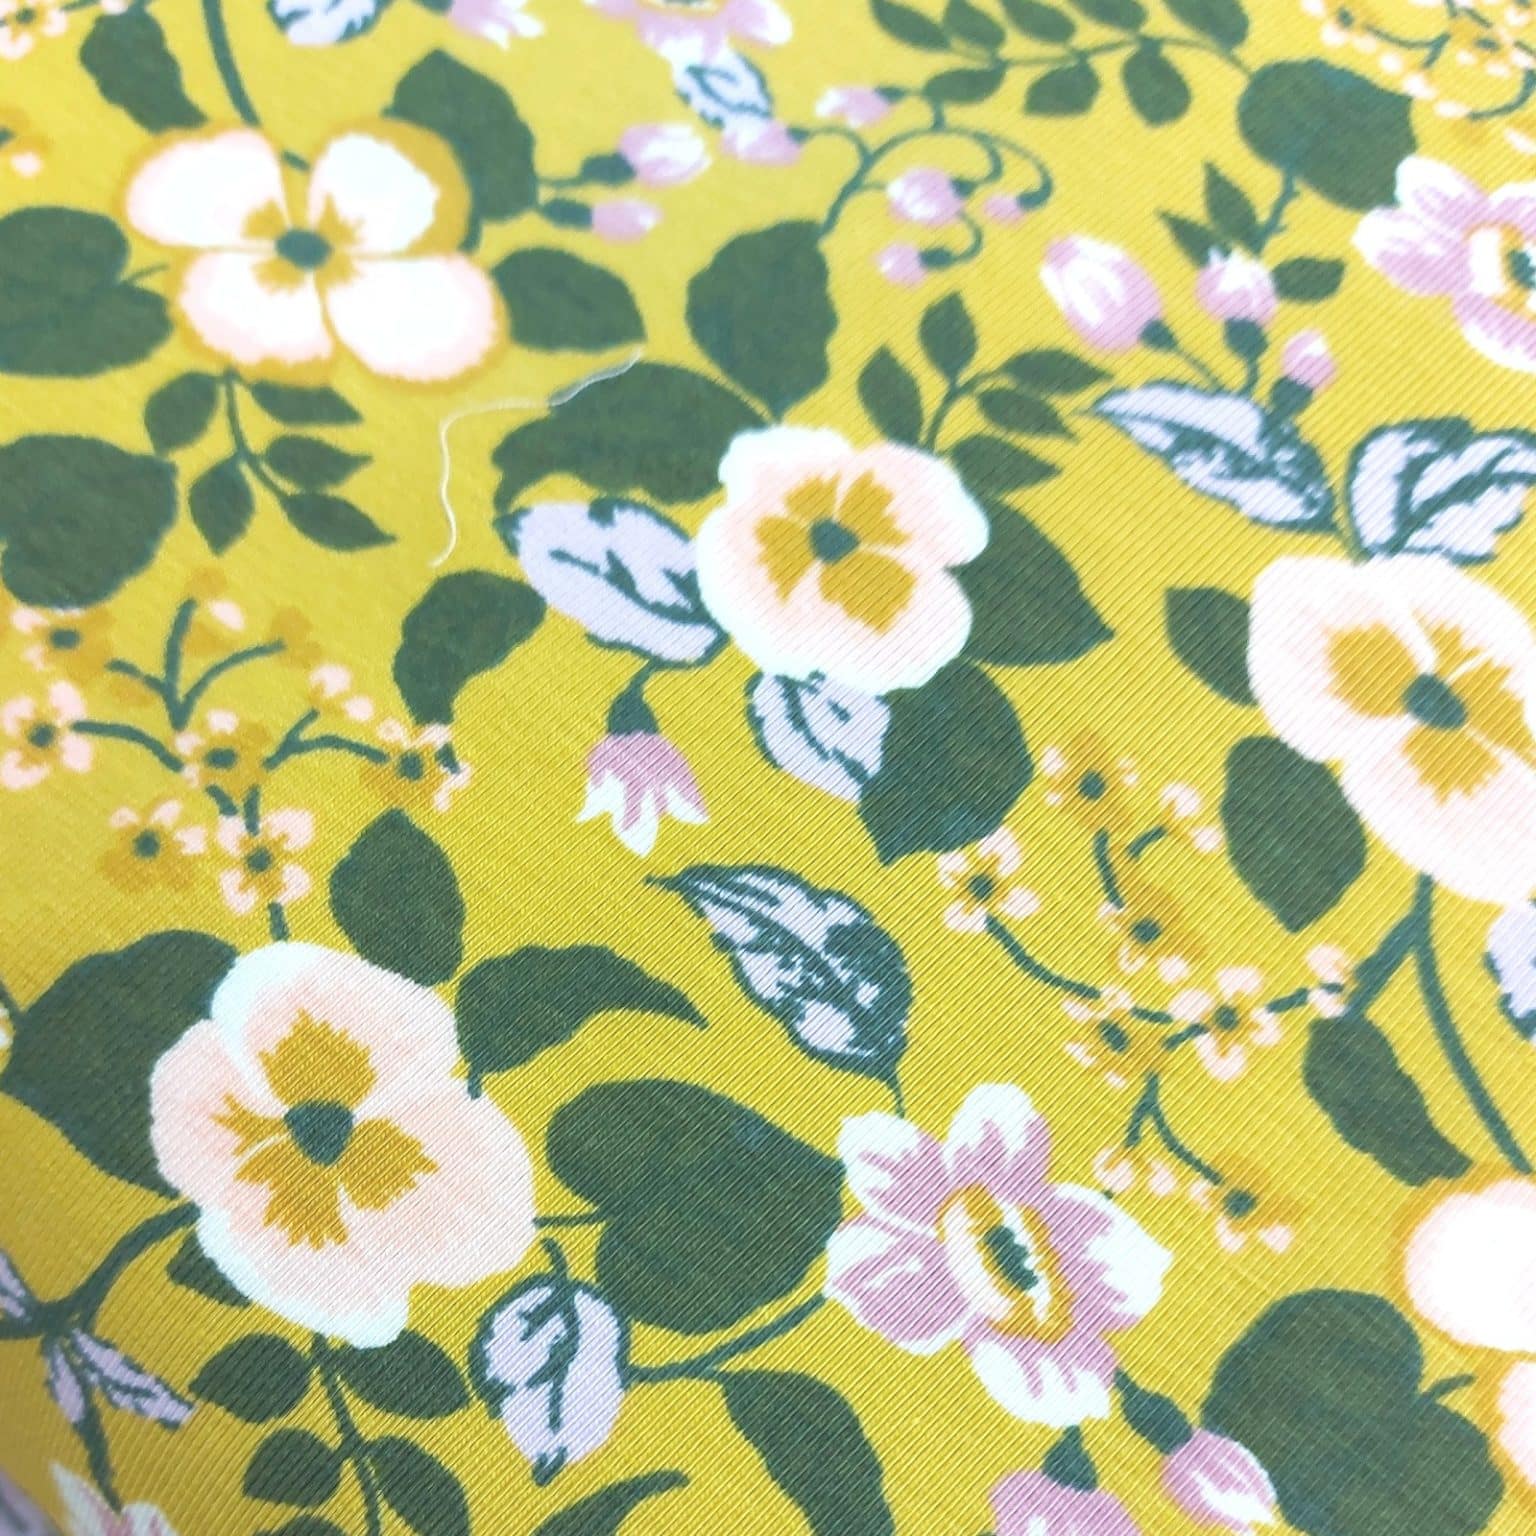 Floral Modal Jersey Fabric at More Sewing